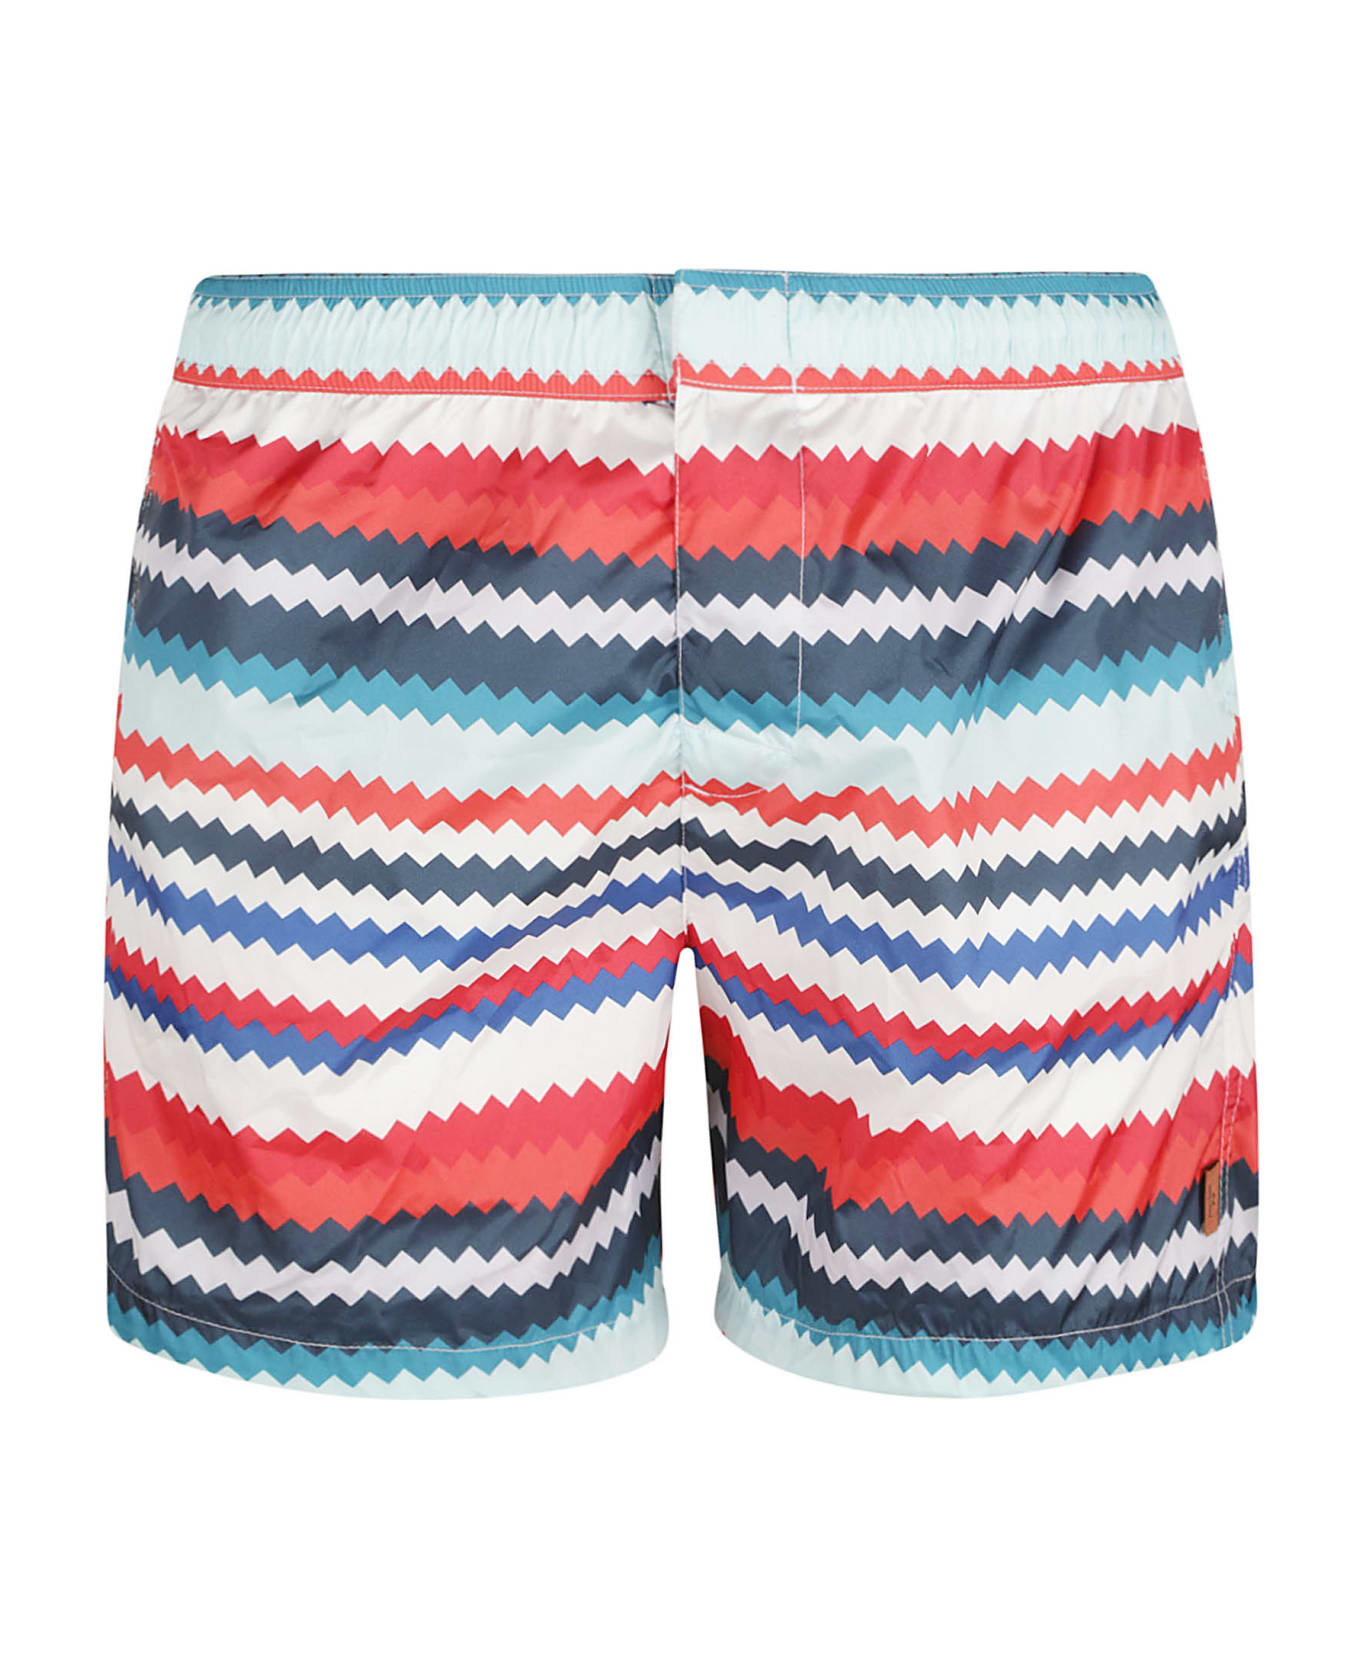 Missoni Printed Polyester Swimming Shorts - Multicolor/Red